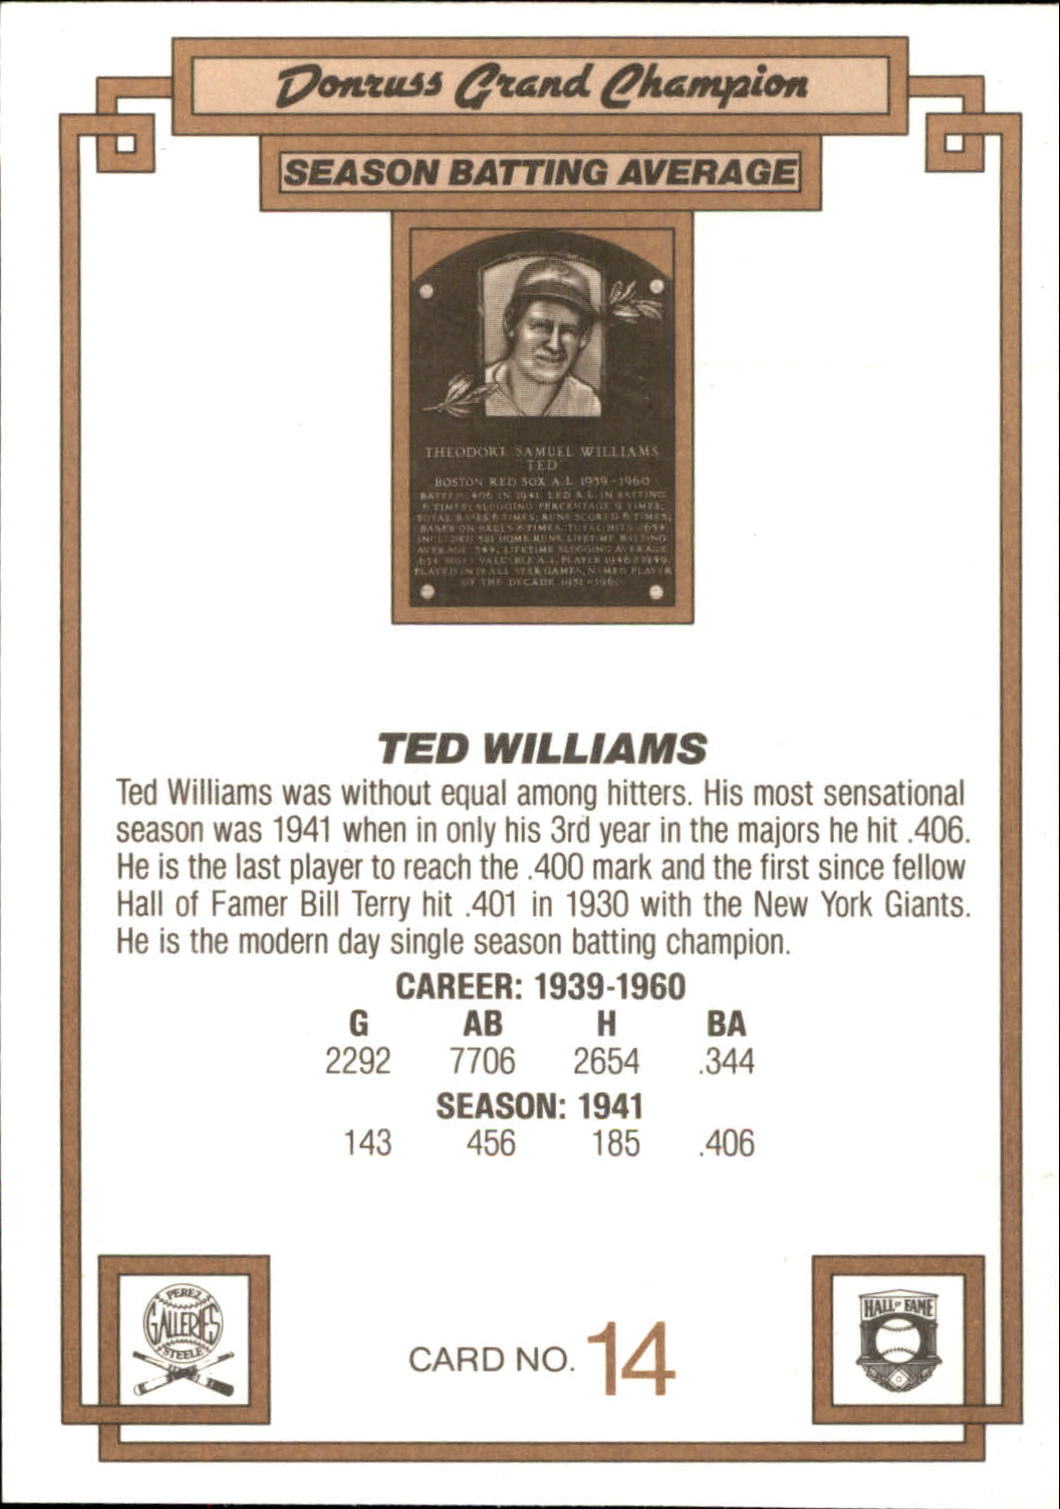 1984 Donruss Champions #14 Ted Williams GC back image